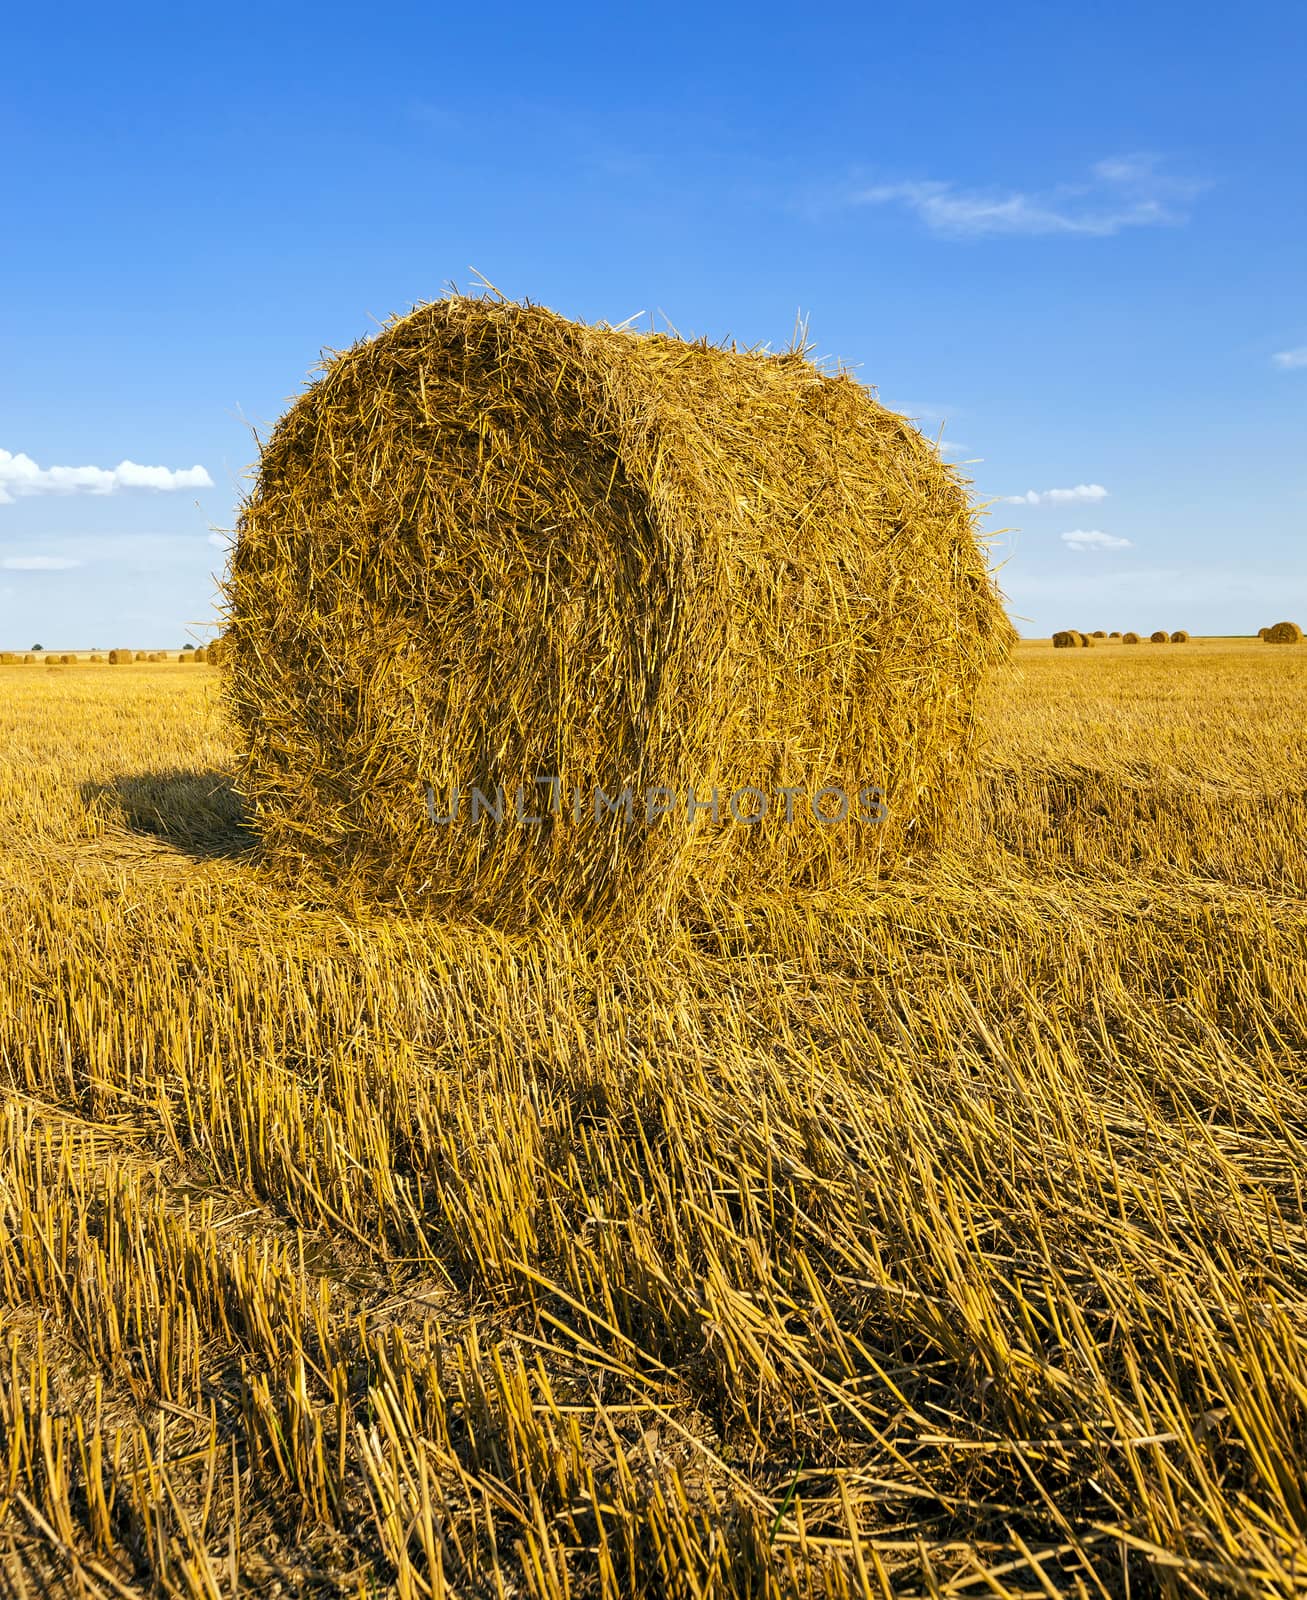  the stack of straw which is on an agricultural field